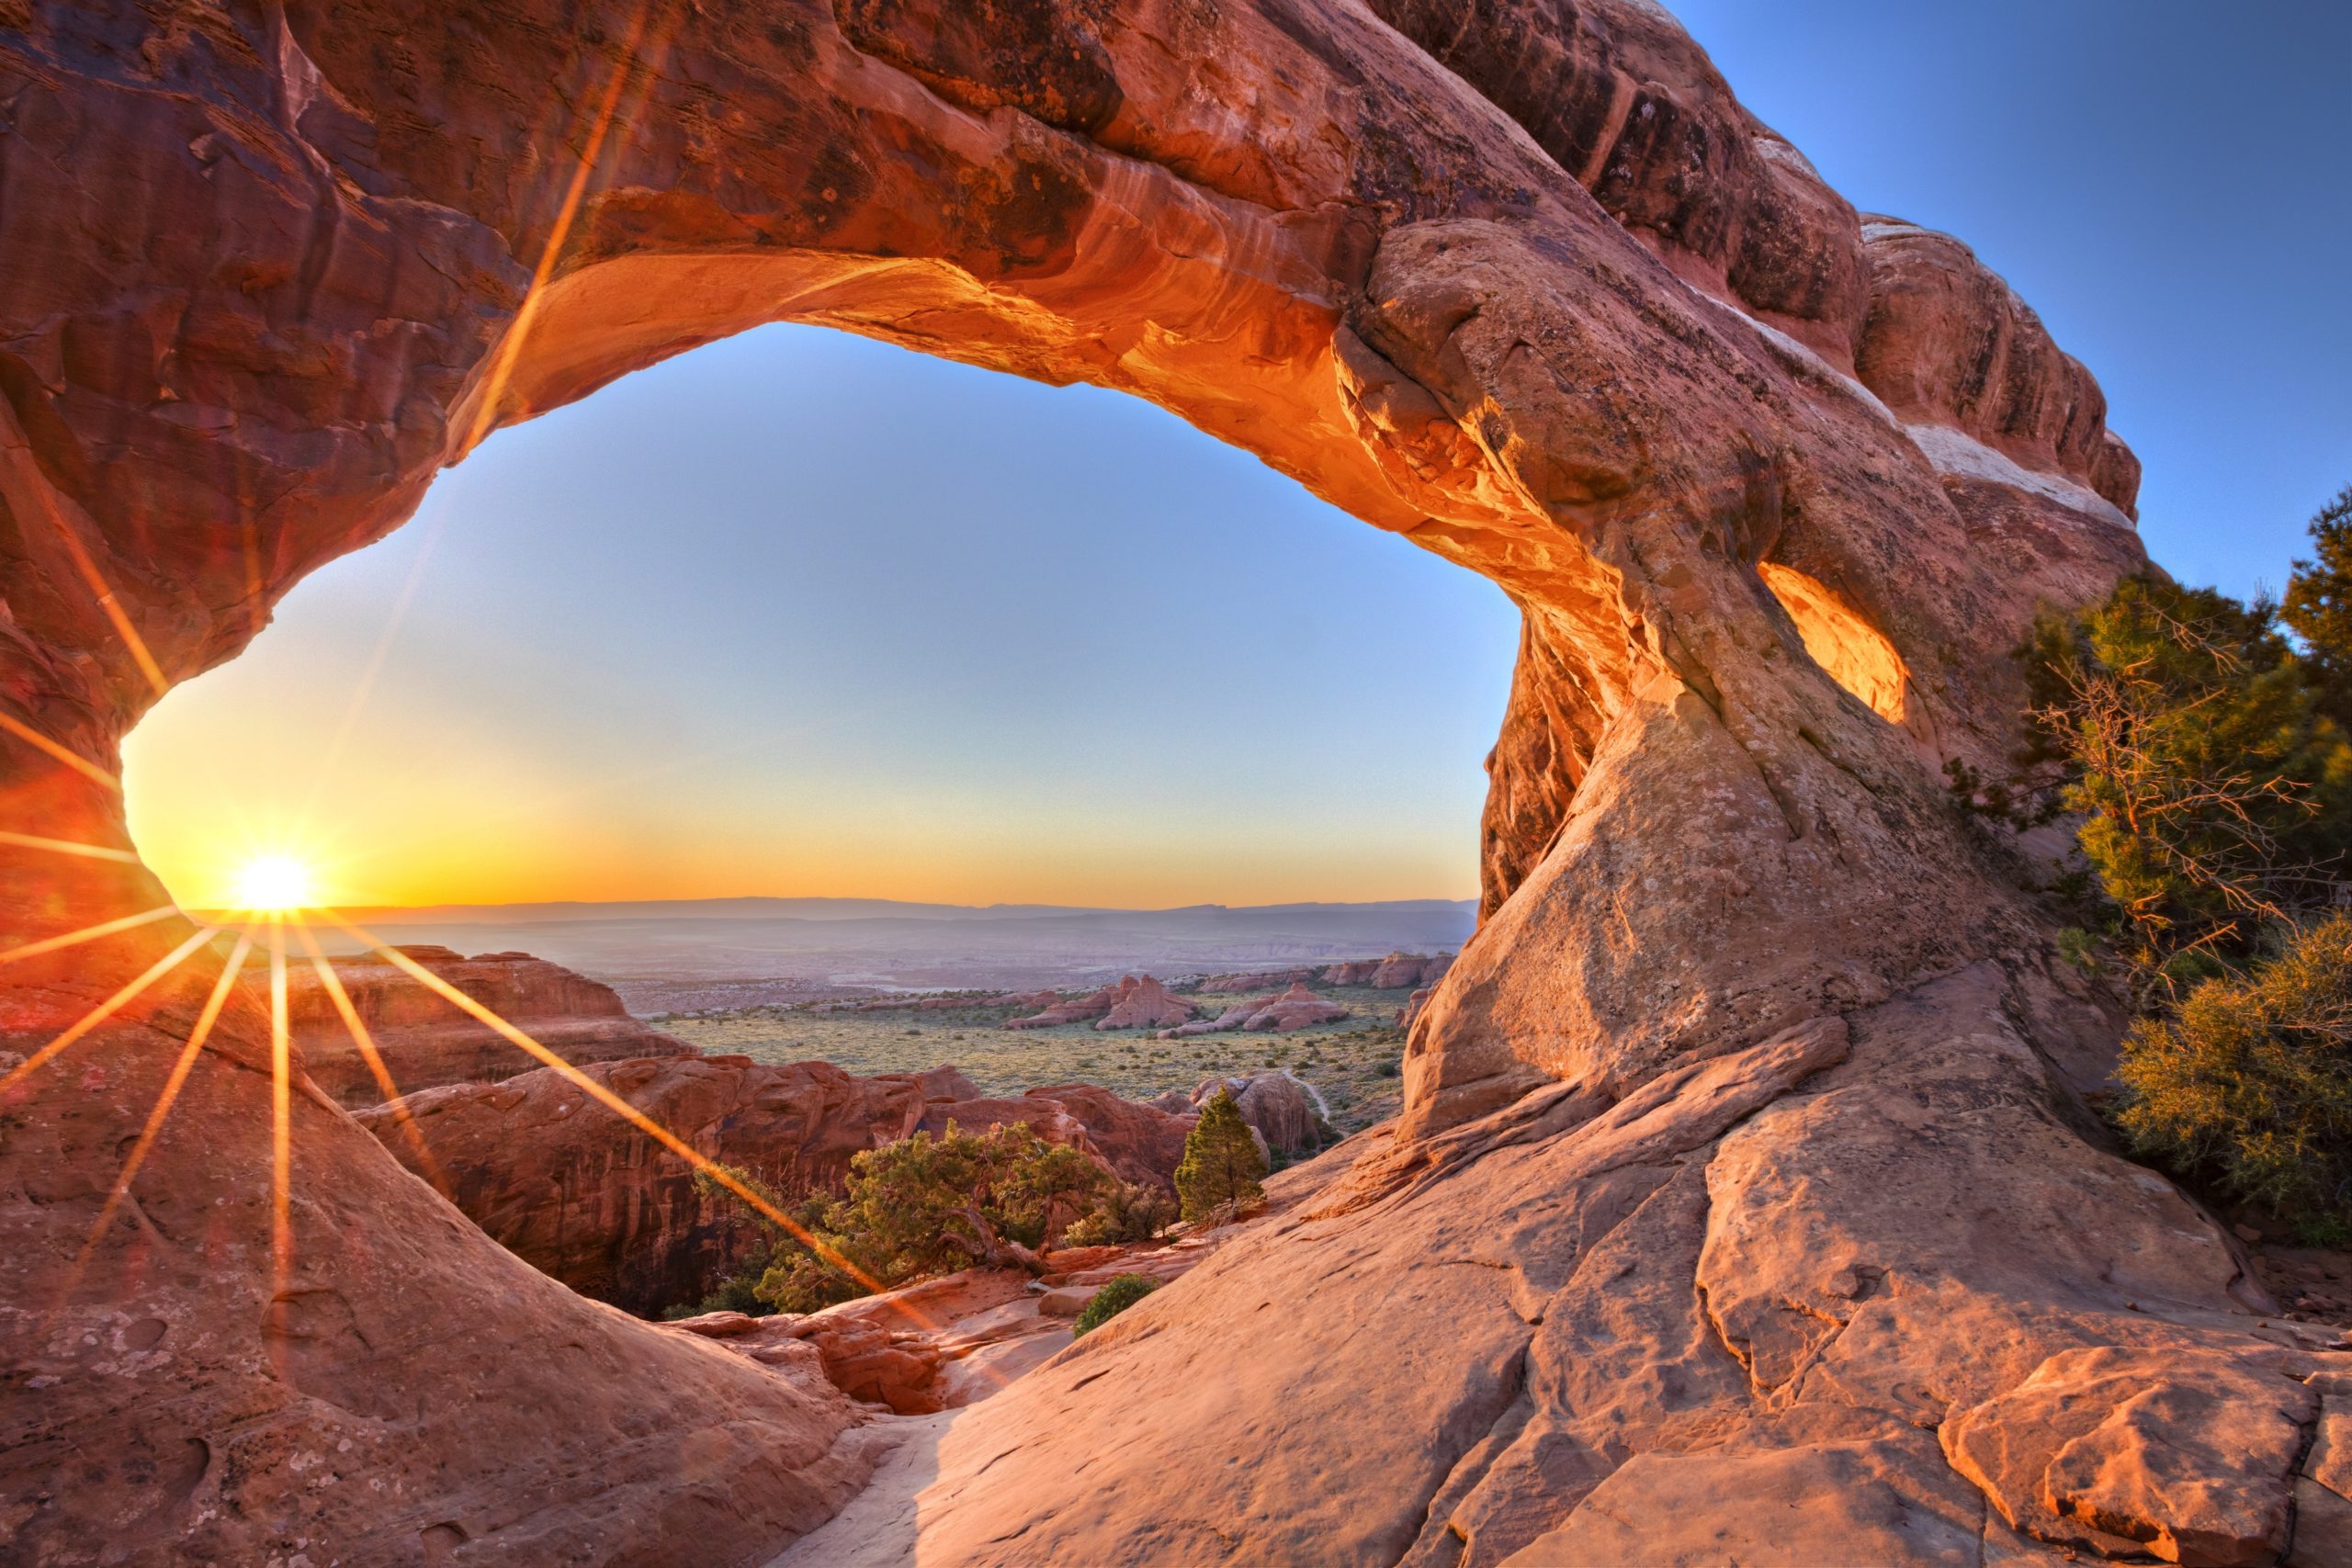 Image of Arches National Park in Utah